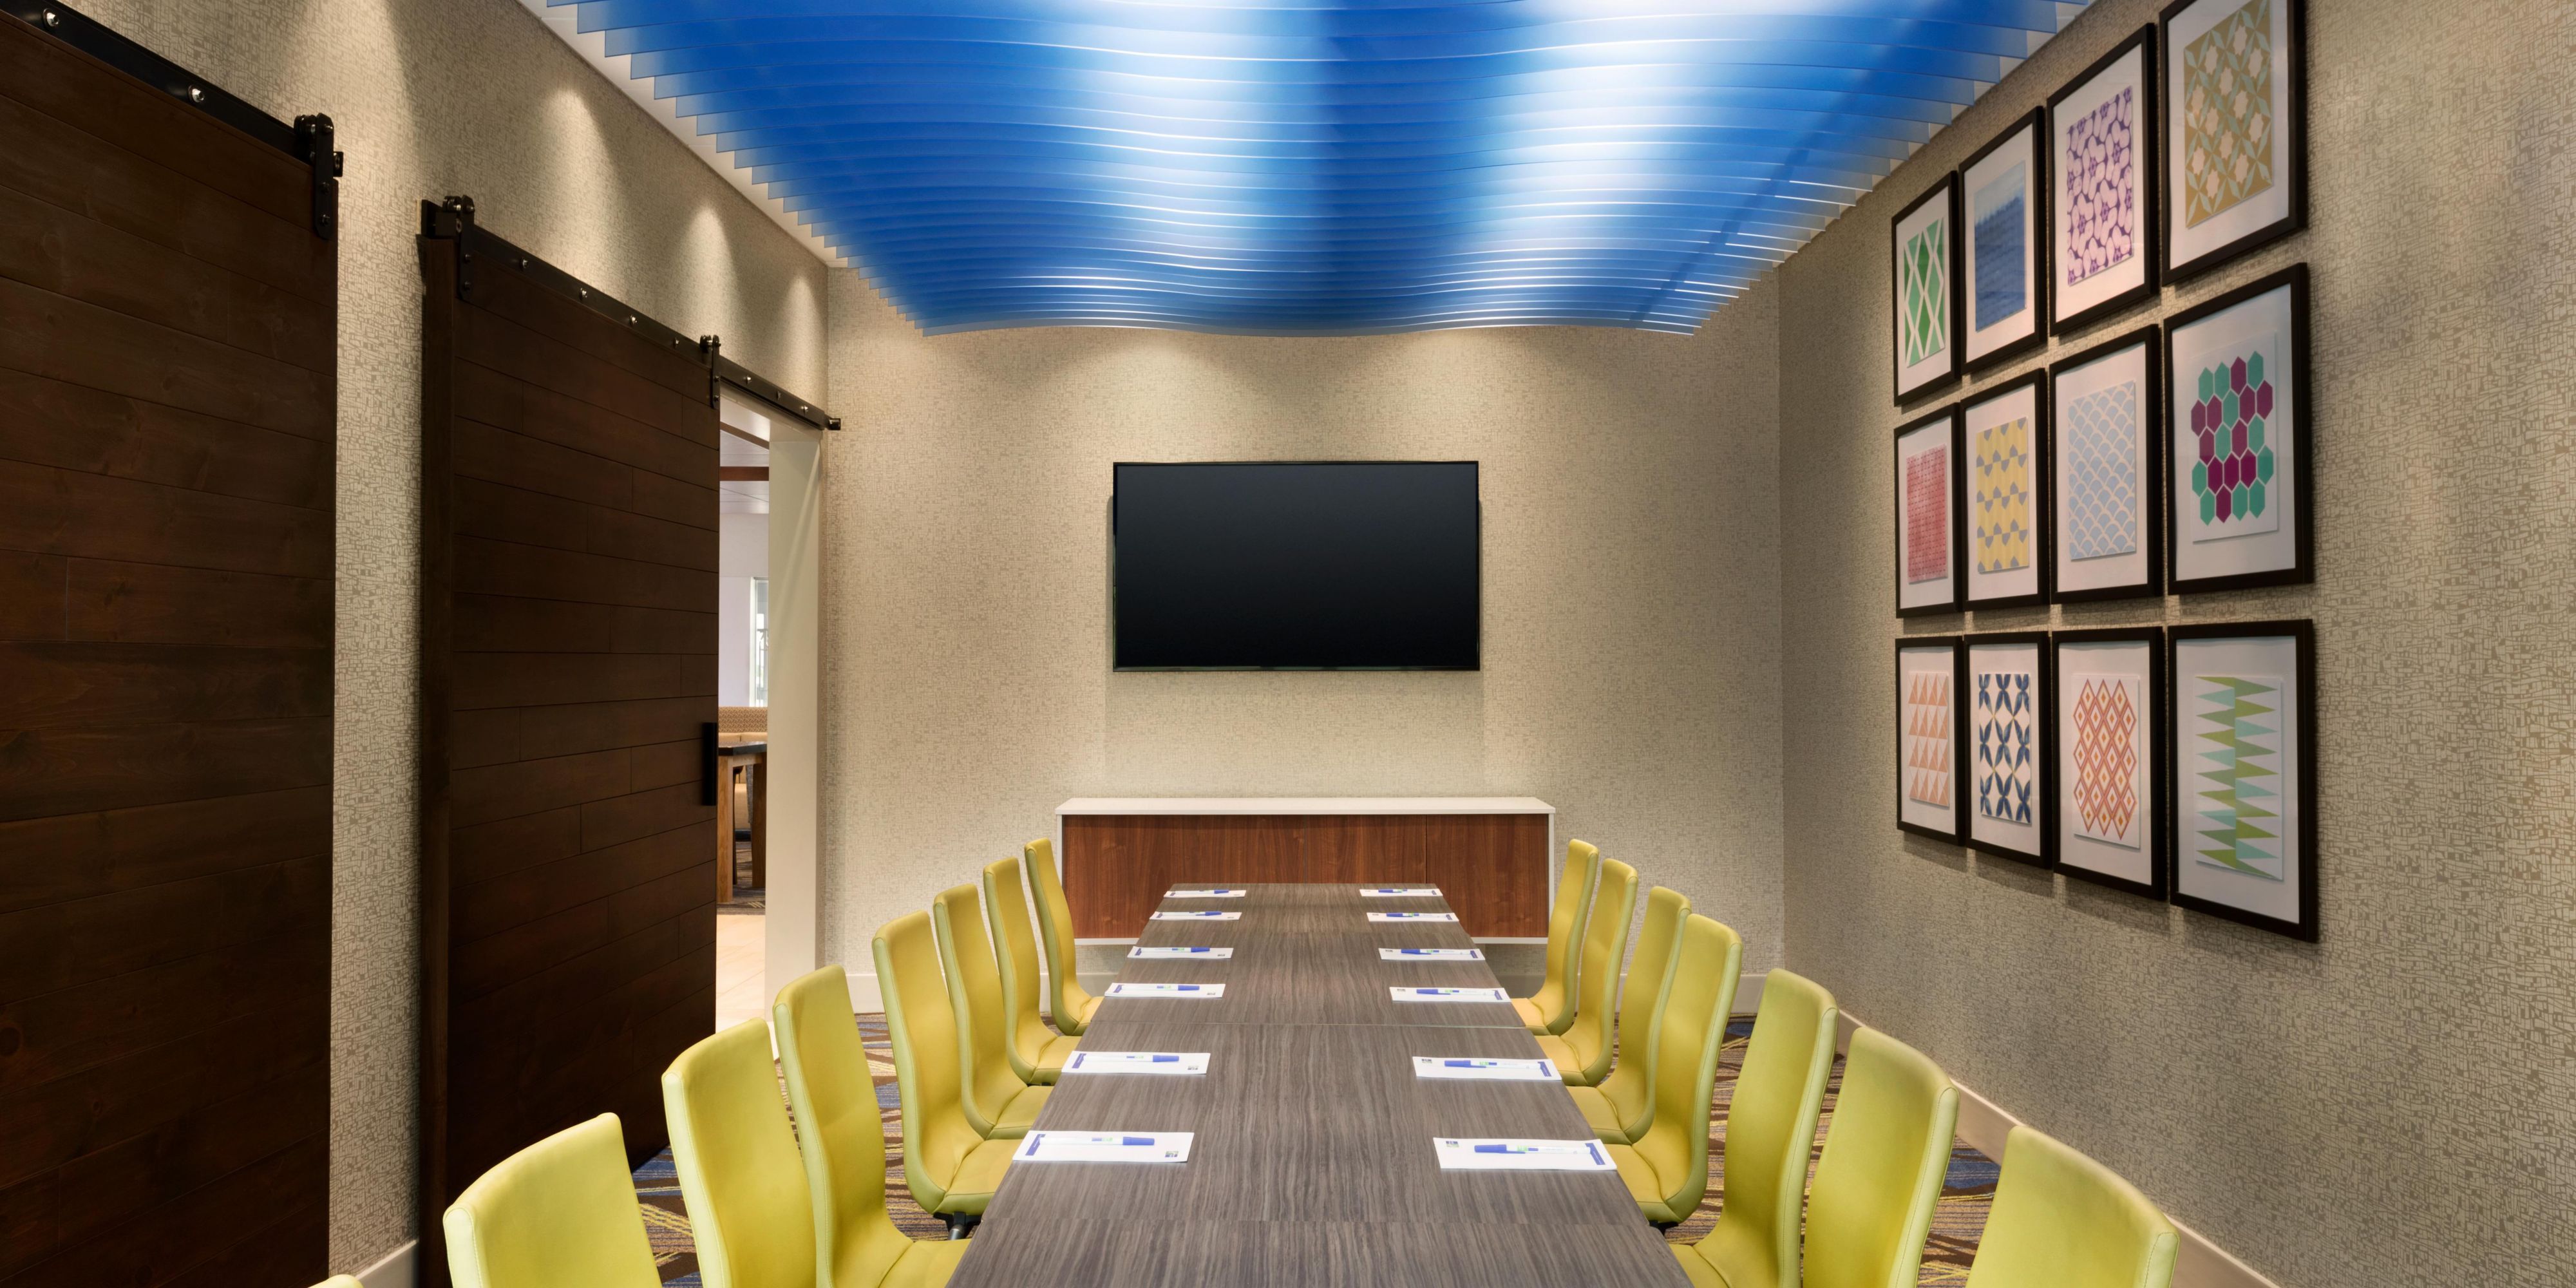 Are you looking for an intimate meeting space that will provide lots of room in a modern setting? Plan your next corporate or leisure outing in our new meeting room and enjoy our brand new hotel! What a way to impress your clients, team, and family! Brett Carter, our Director of Sales, would be more than happy to plan your next meeting. 